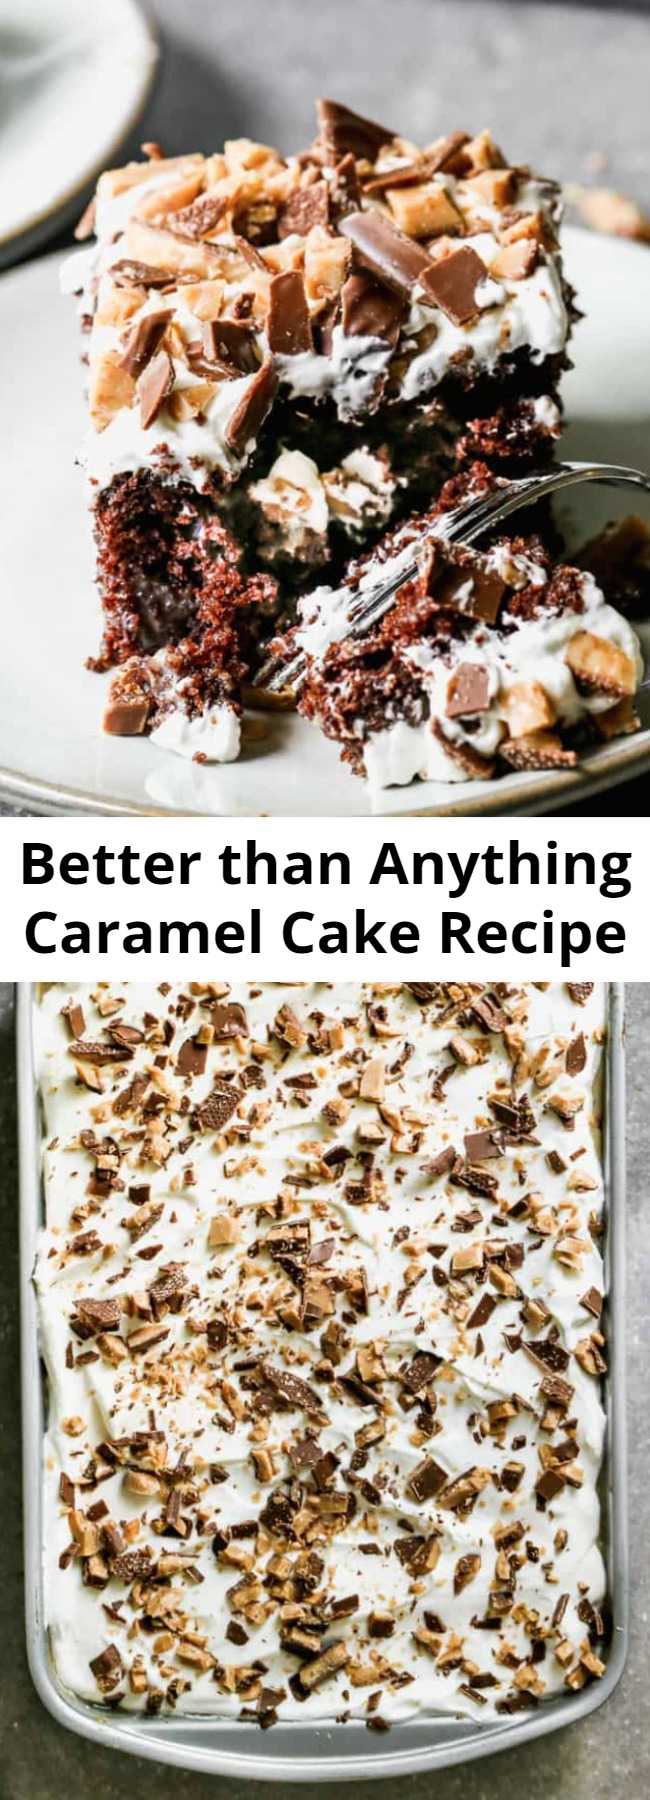 Quick & Easy Better than Sex Cake Recipe - Better than Sex Cake made with chocolate cake soaked in homemade caramel sauce and topped with fresh whipped cream. Whether or not you think it lives up to it’s name, it’s always a crowd favorite!